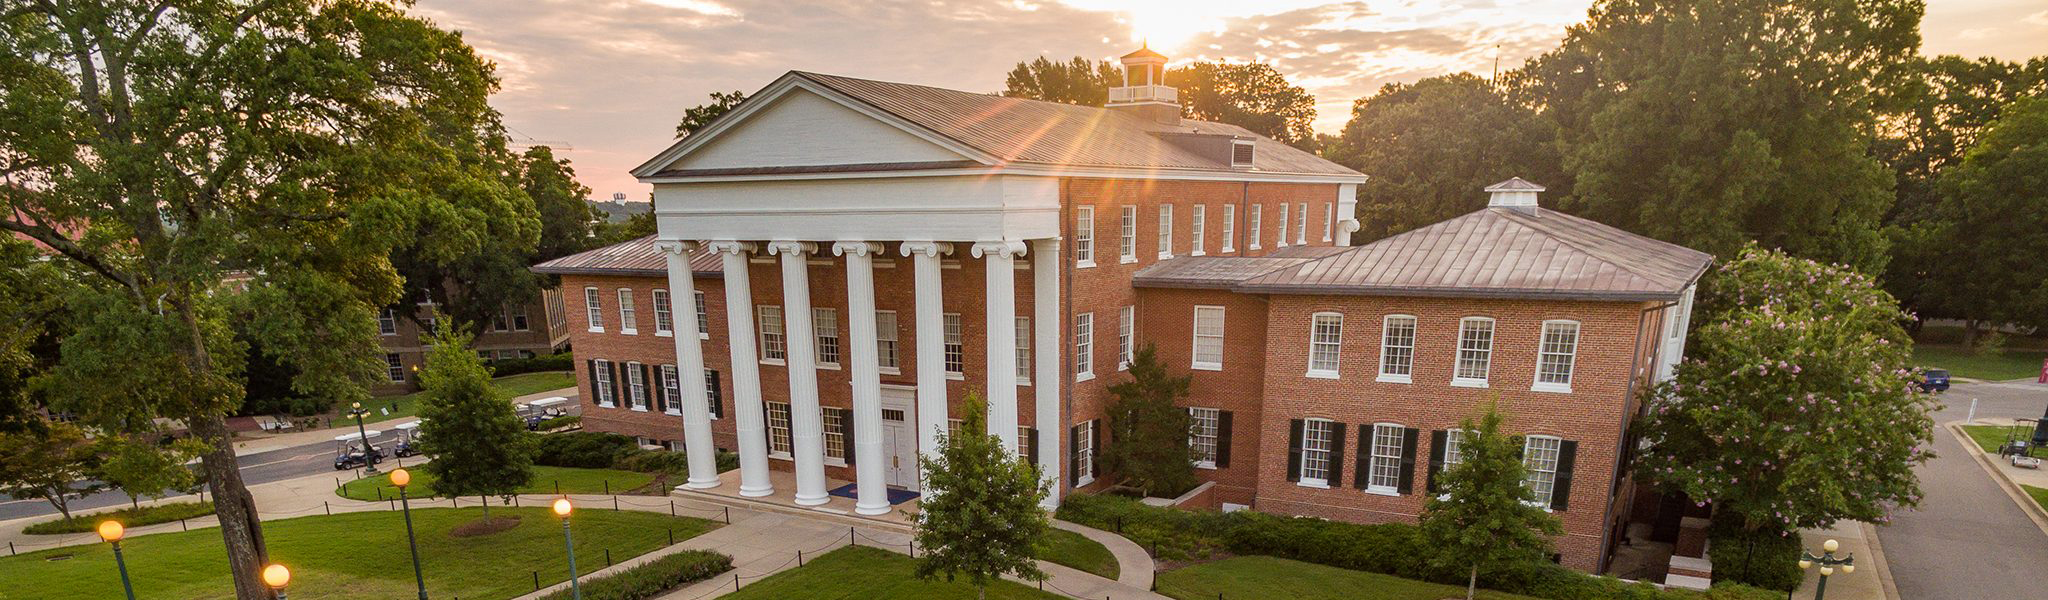 University of Mississippi, home of the Wynn-Faulkner collection containing works by author William Faulkner